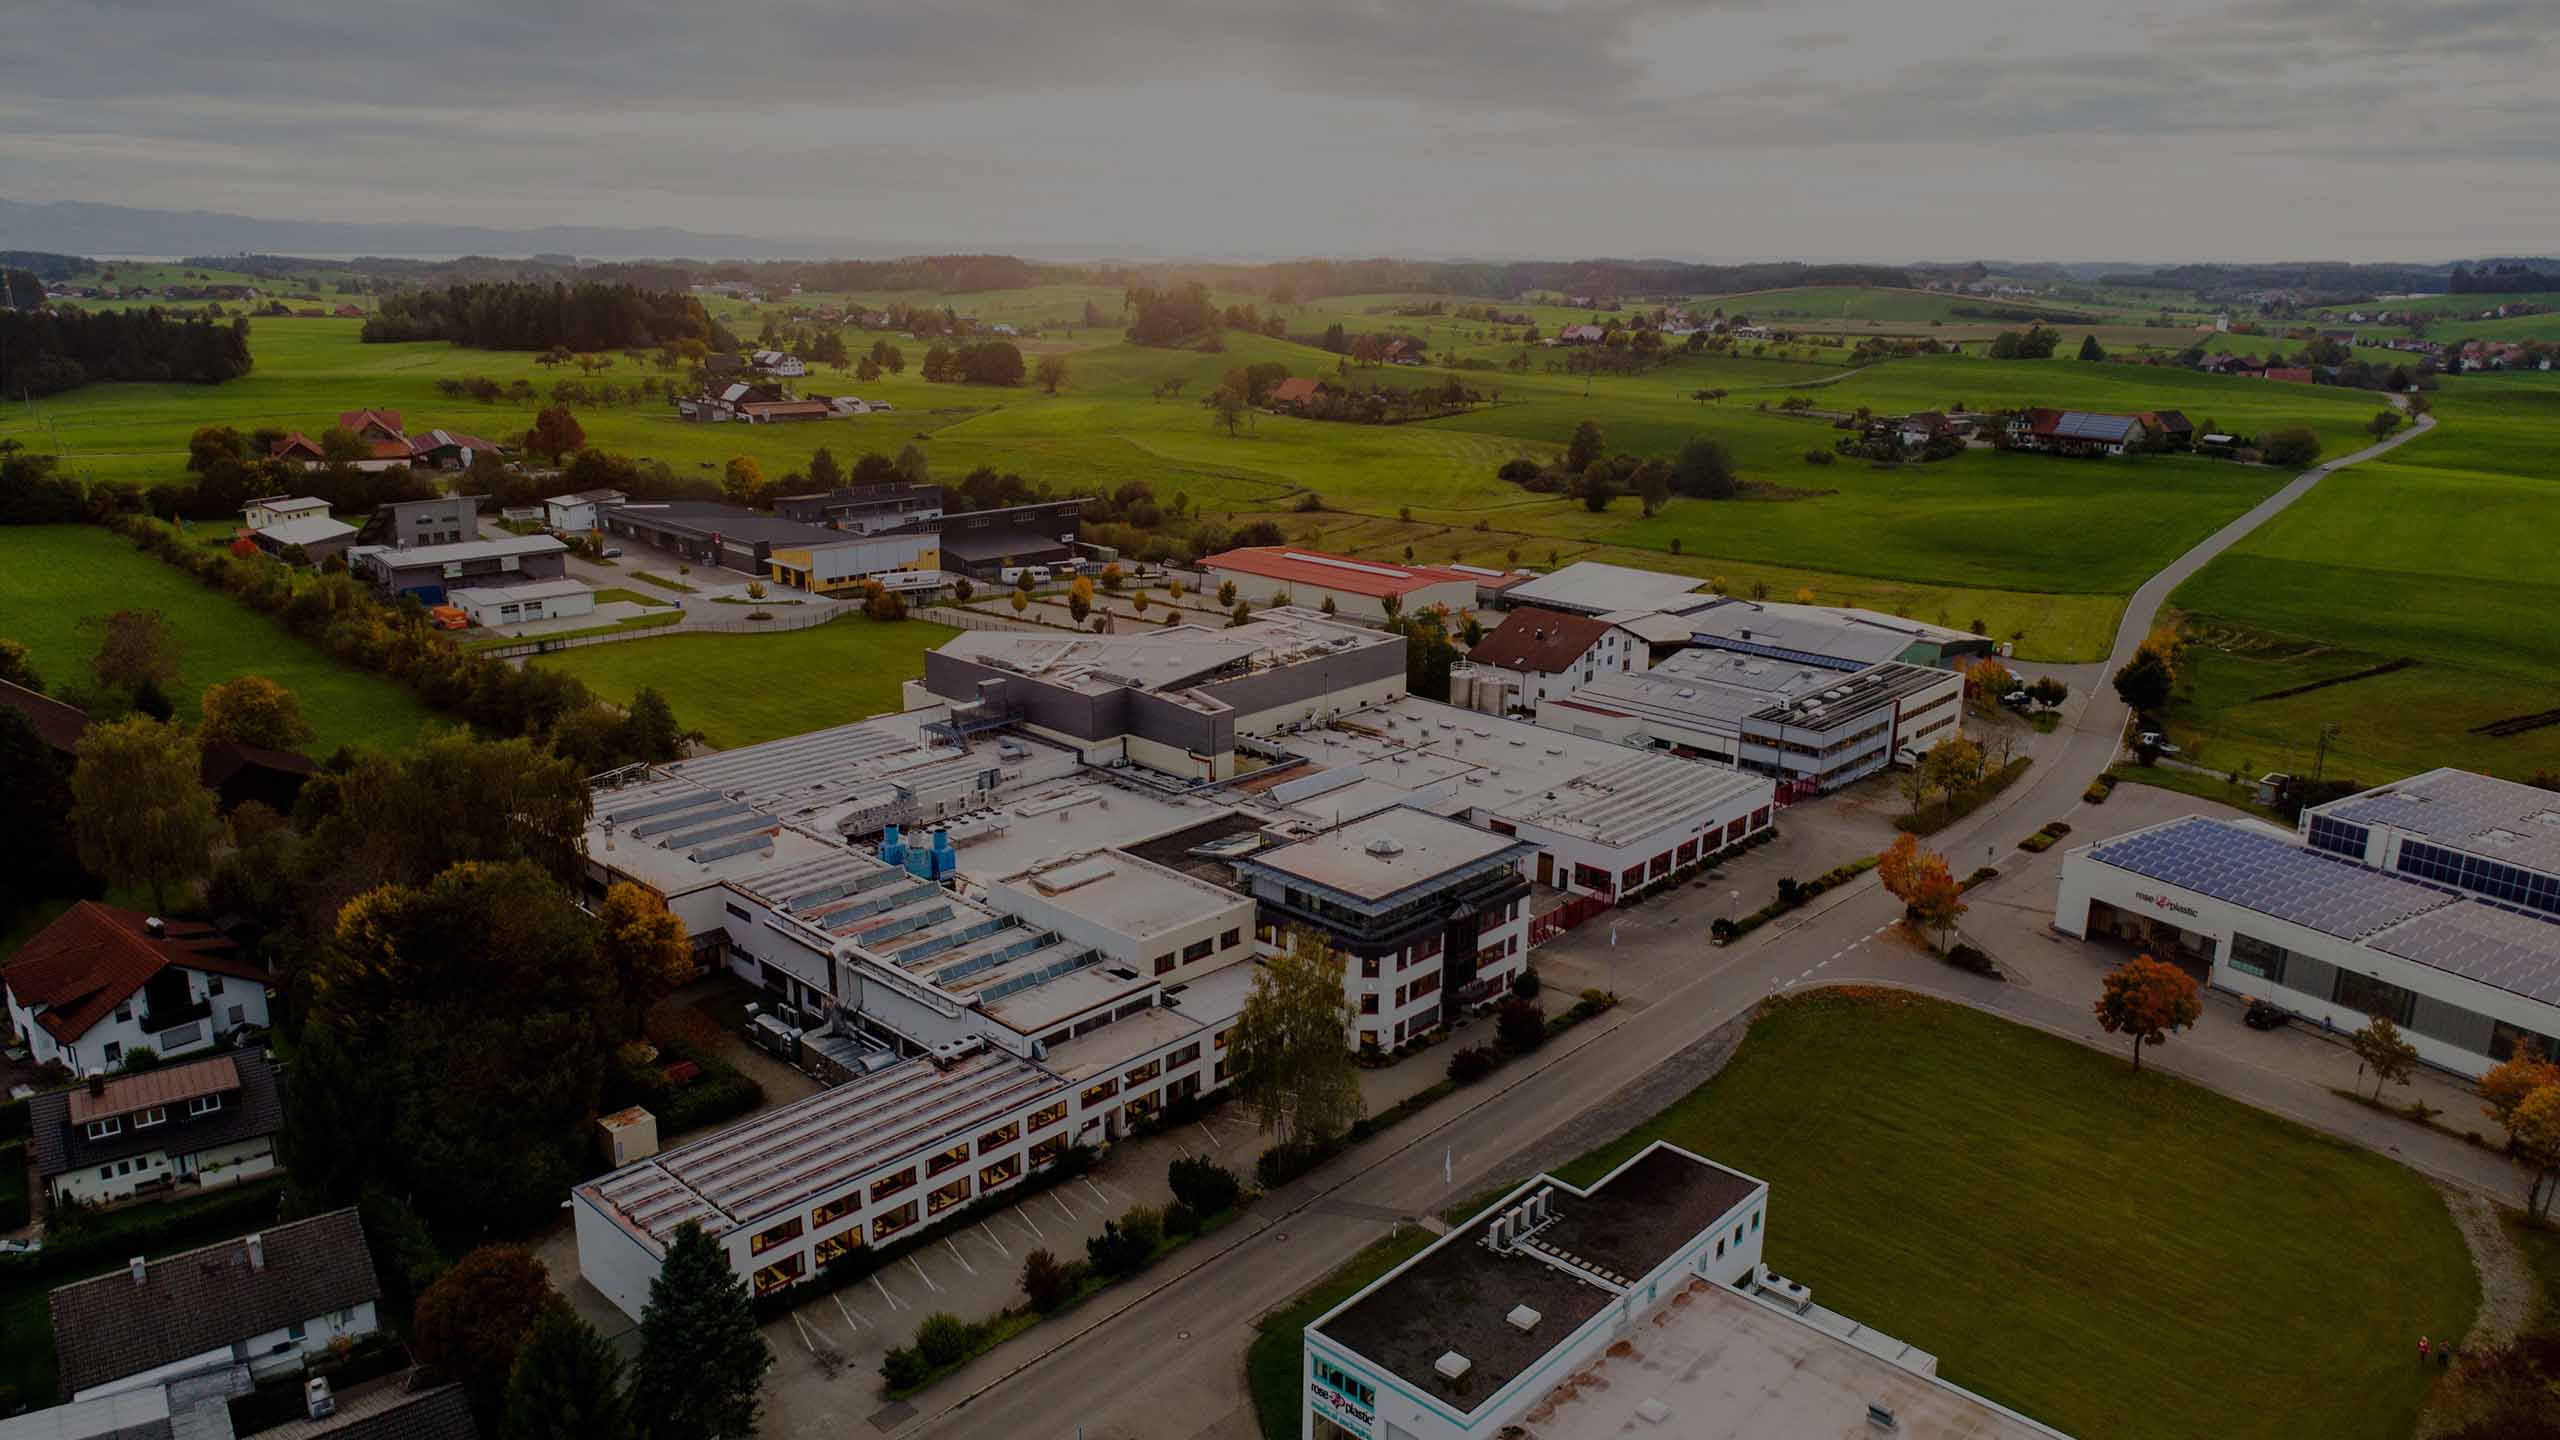 Head office of rose plastic in Hergensweiler, Germany.